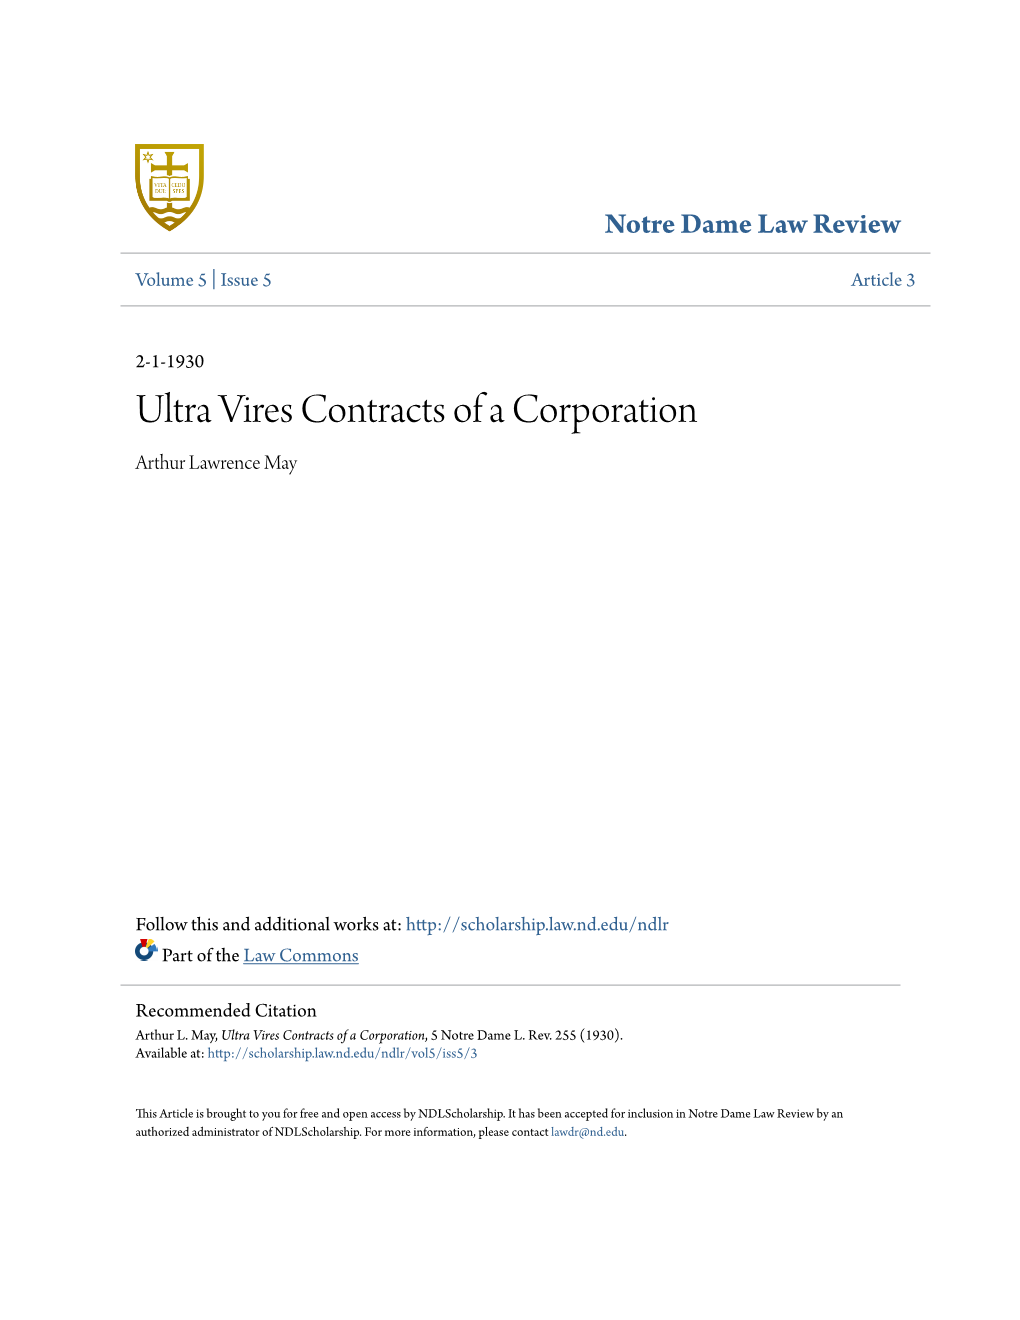 Ultra Vires Contracts of a Corporation Arthur Lawrence May